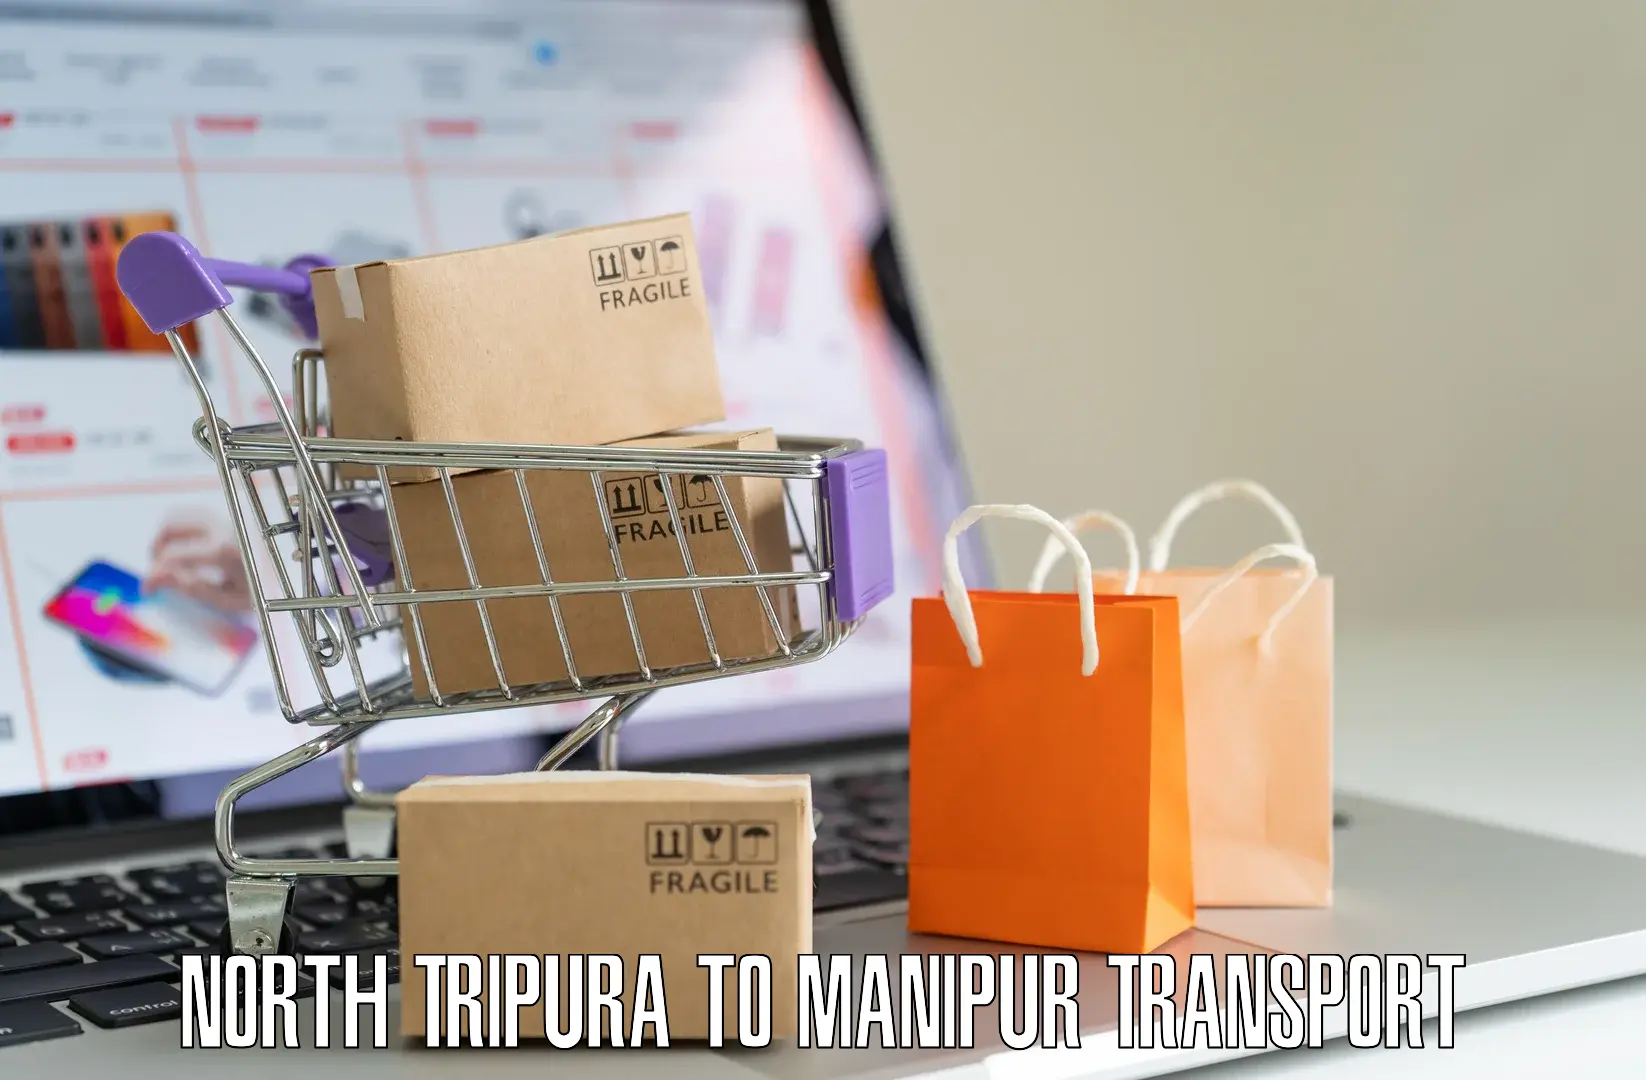 Road transport services in North Tripura to Ukhrul